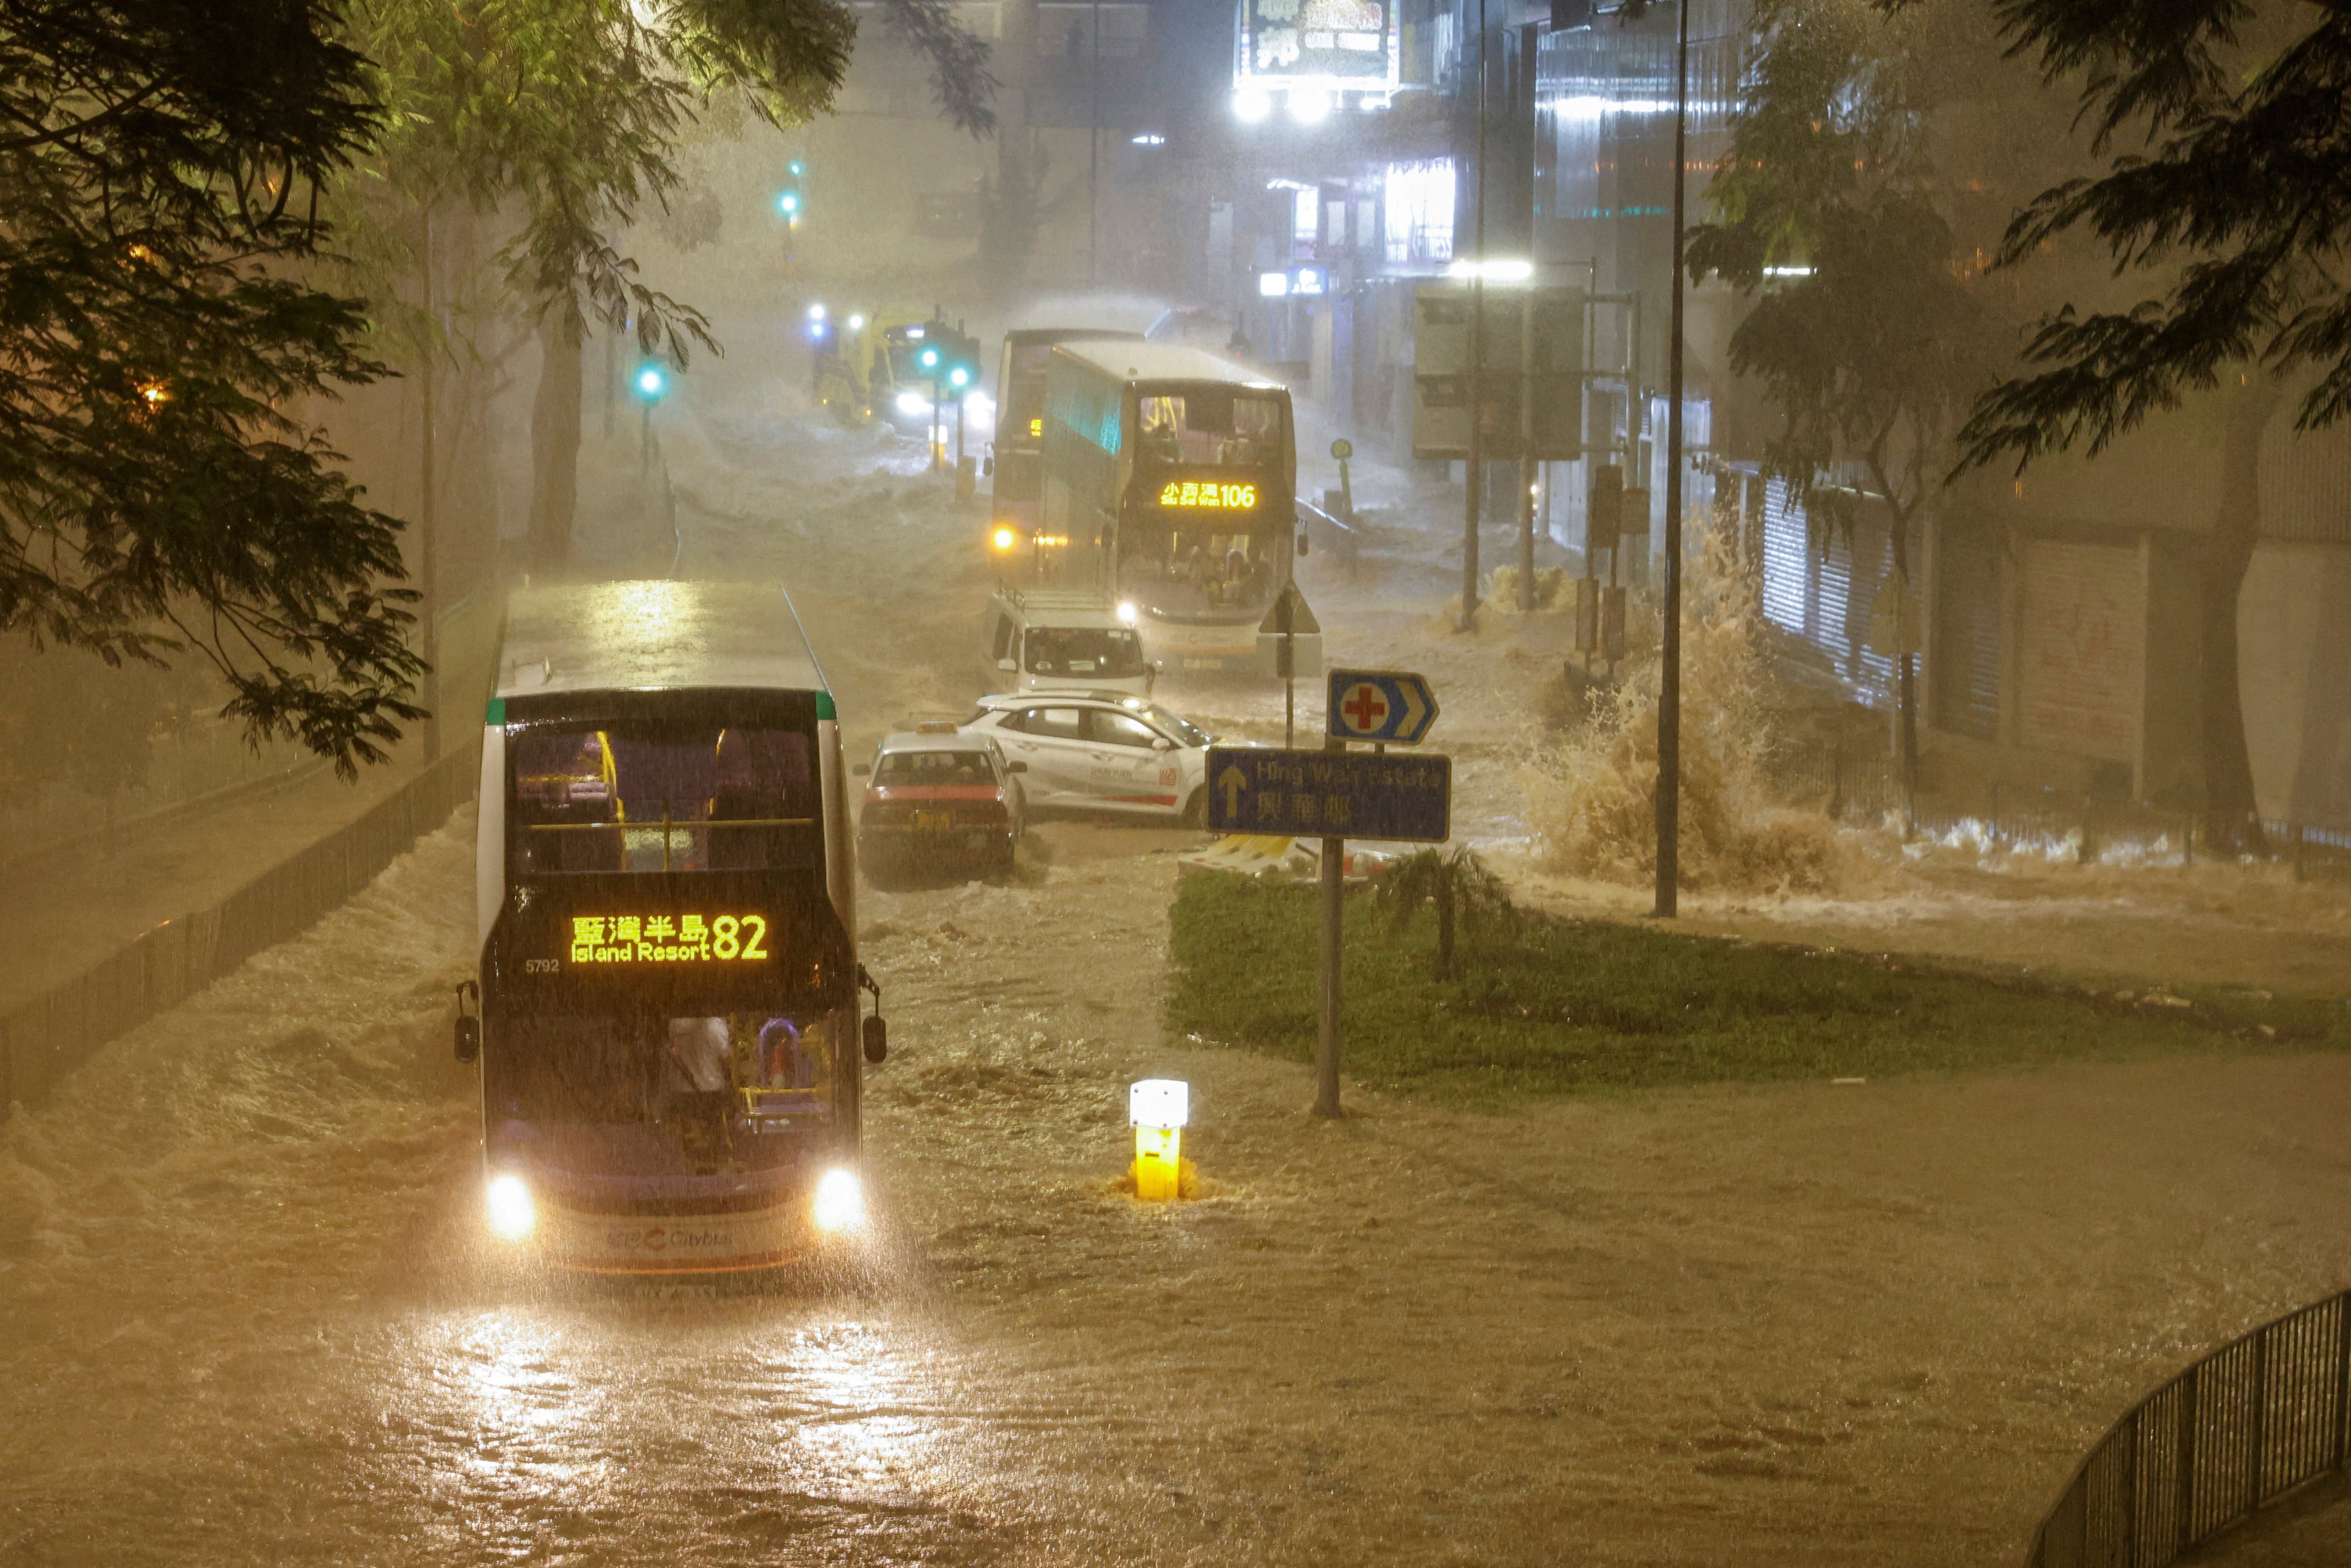 A bus drives through a flooded area during heavy rain in Hong Kong on September 8. Photo: Reuters